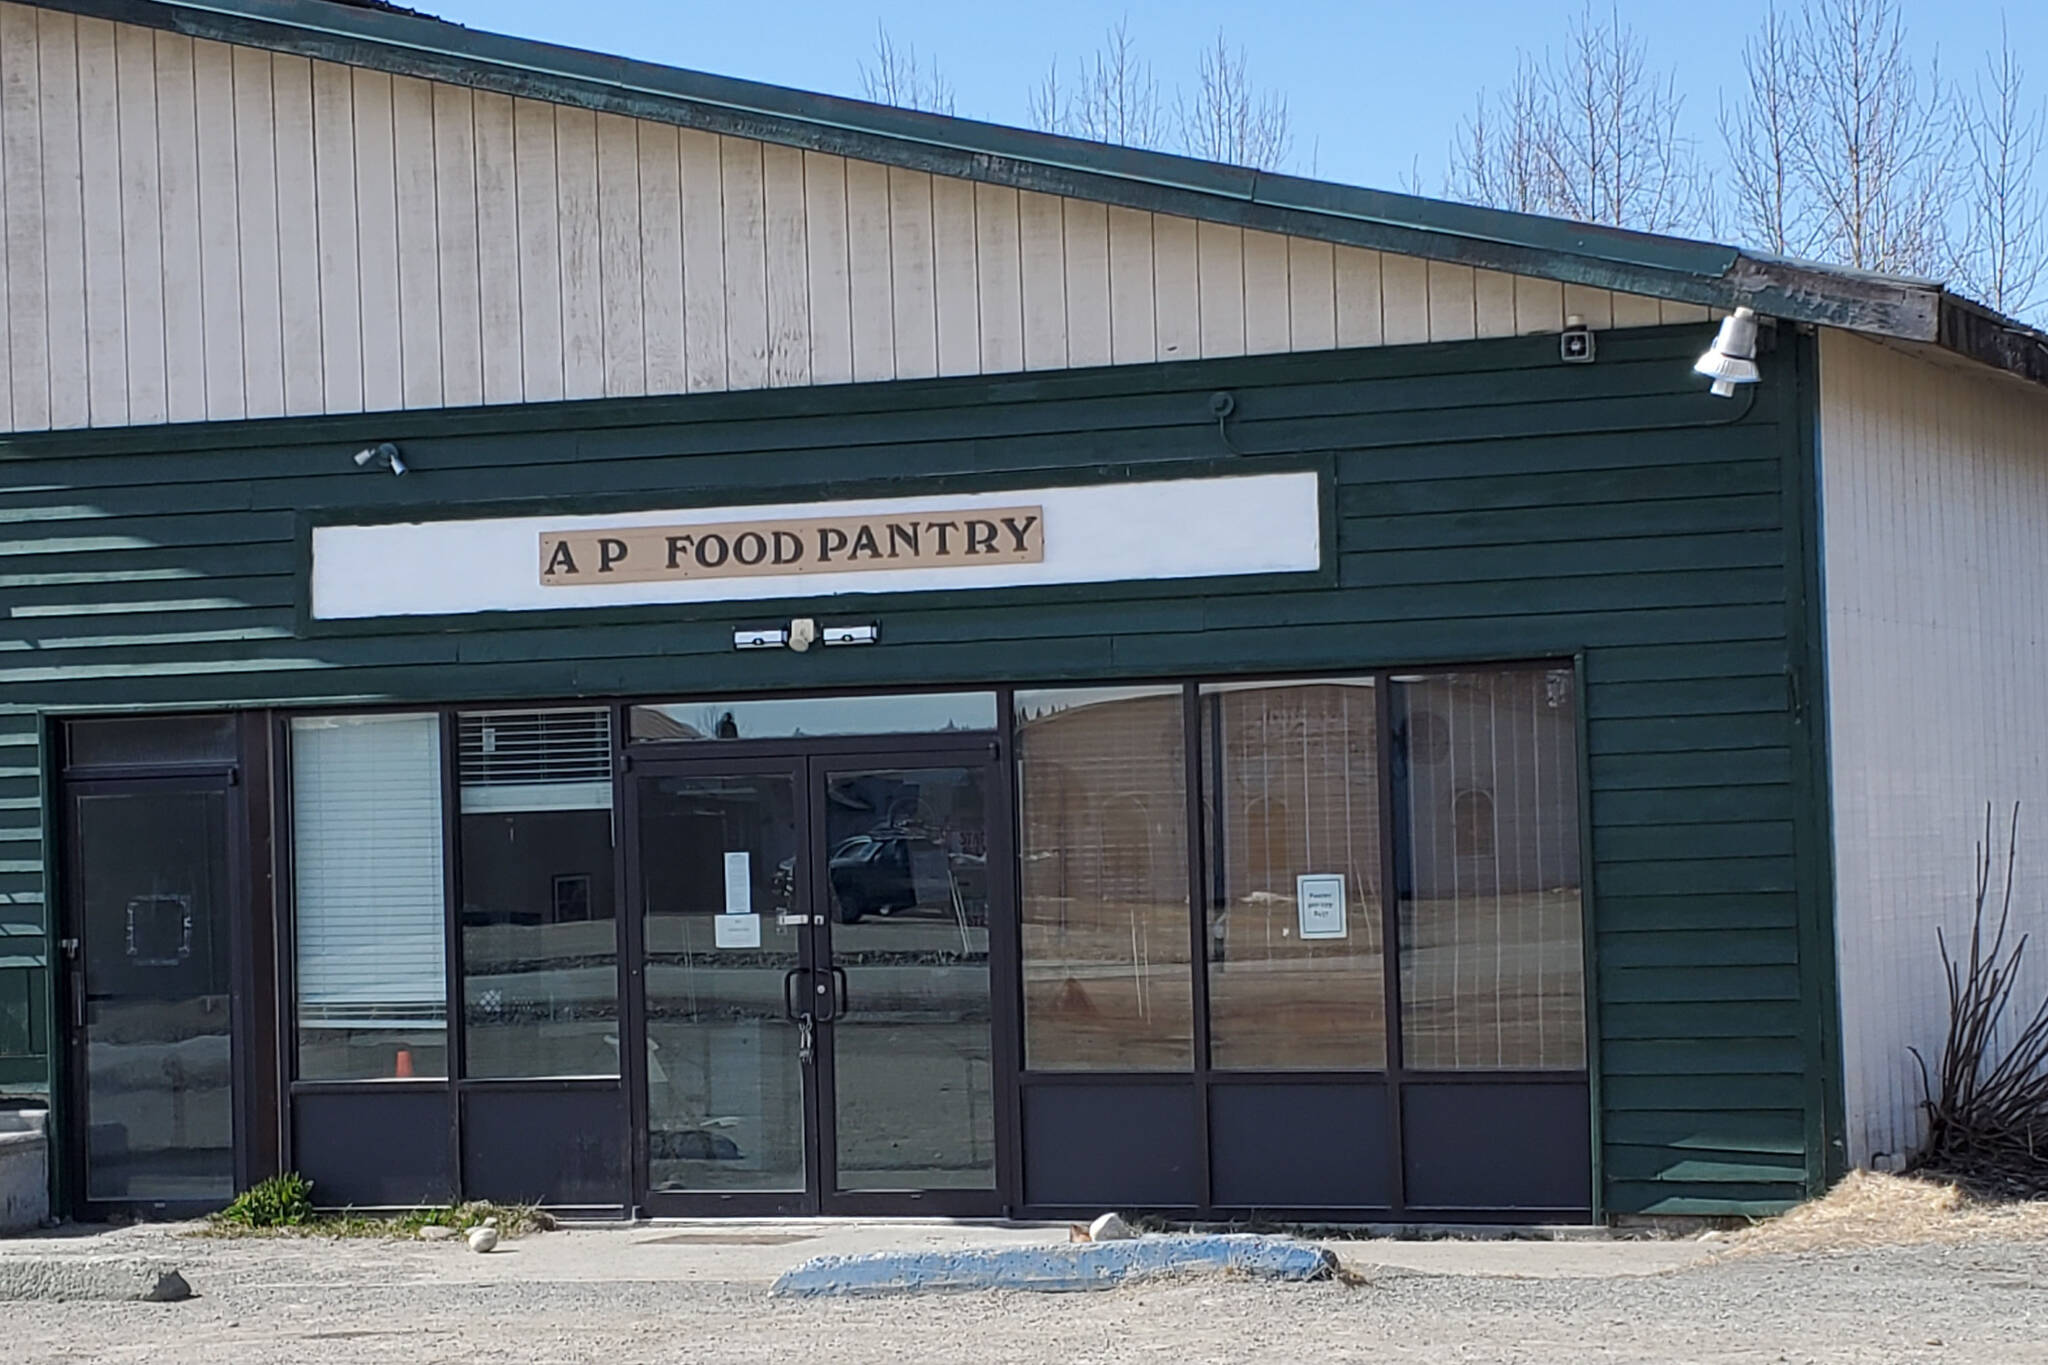 The Anchor Point Food Pantry, photographed on Saturday, April 22, 2023, is located at 34361 Old Sterling Hwy, Unit A in Anchor Point, Alaska. (Photo by Delcenia Cosman/Homer News)